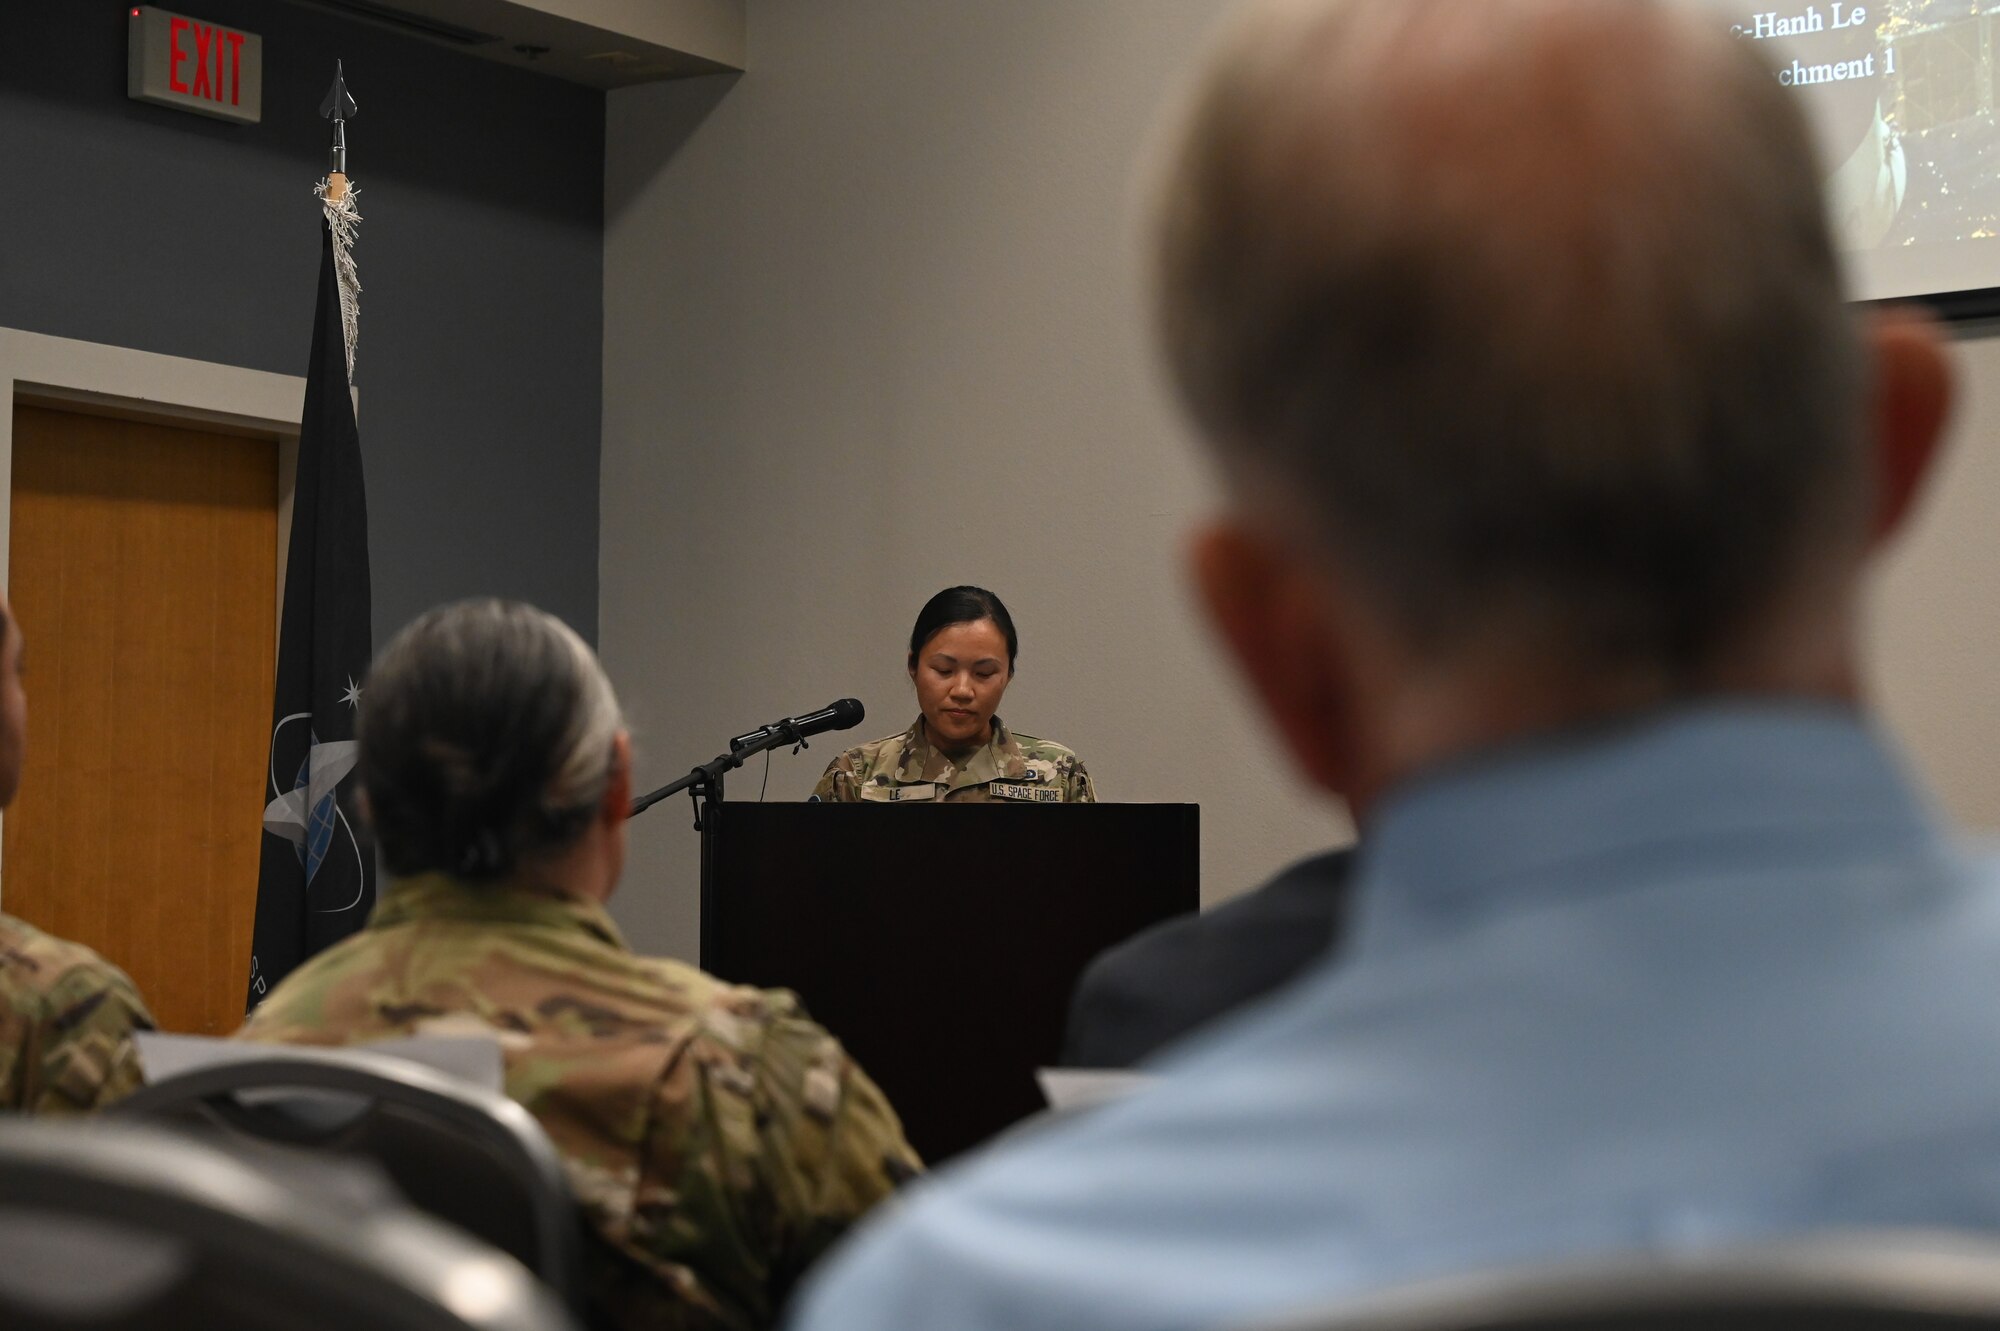 U.S. Space Force Senior Master Sgt. Ngoc-Hanh Le, 533rd Training Squadron Detachment 1 senior enlisted leader, speaks at the Powell Event Center, Goodfellow Air Force Base, Texas, May 5, 2023. After six and a half years of being enlisted in the Air Force, Le was compelled to transfer to the Space Force in February of 2021. (U.S. Air Force photo by Airman 1st Class Madison Collier)